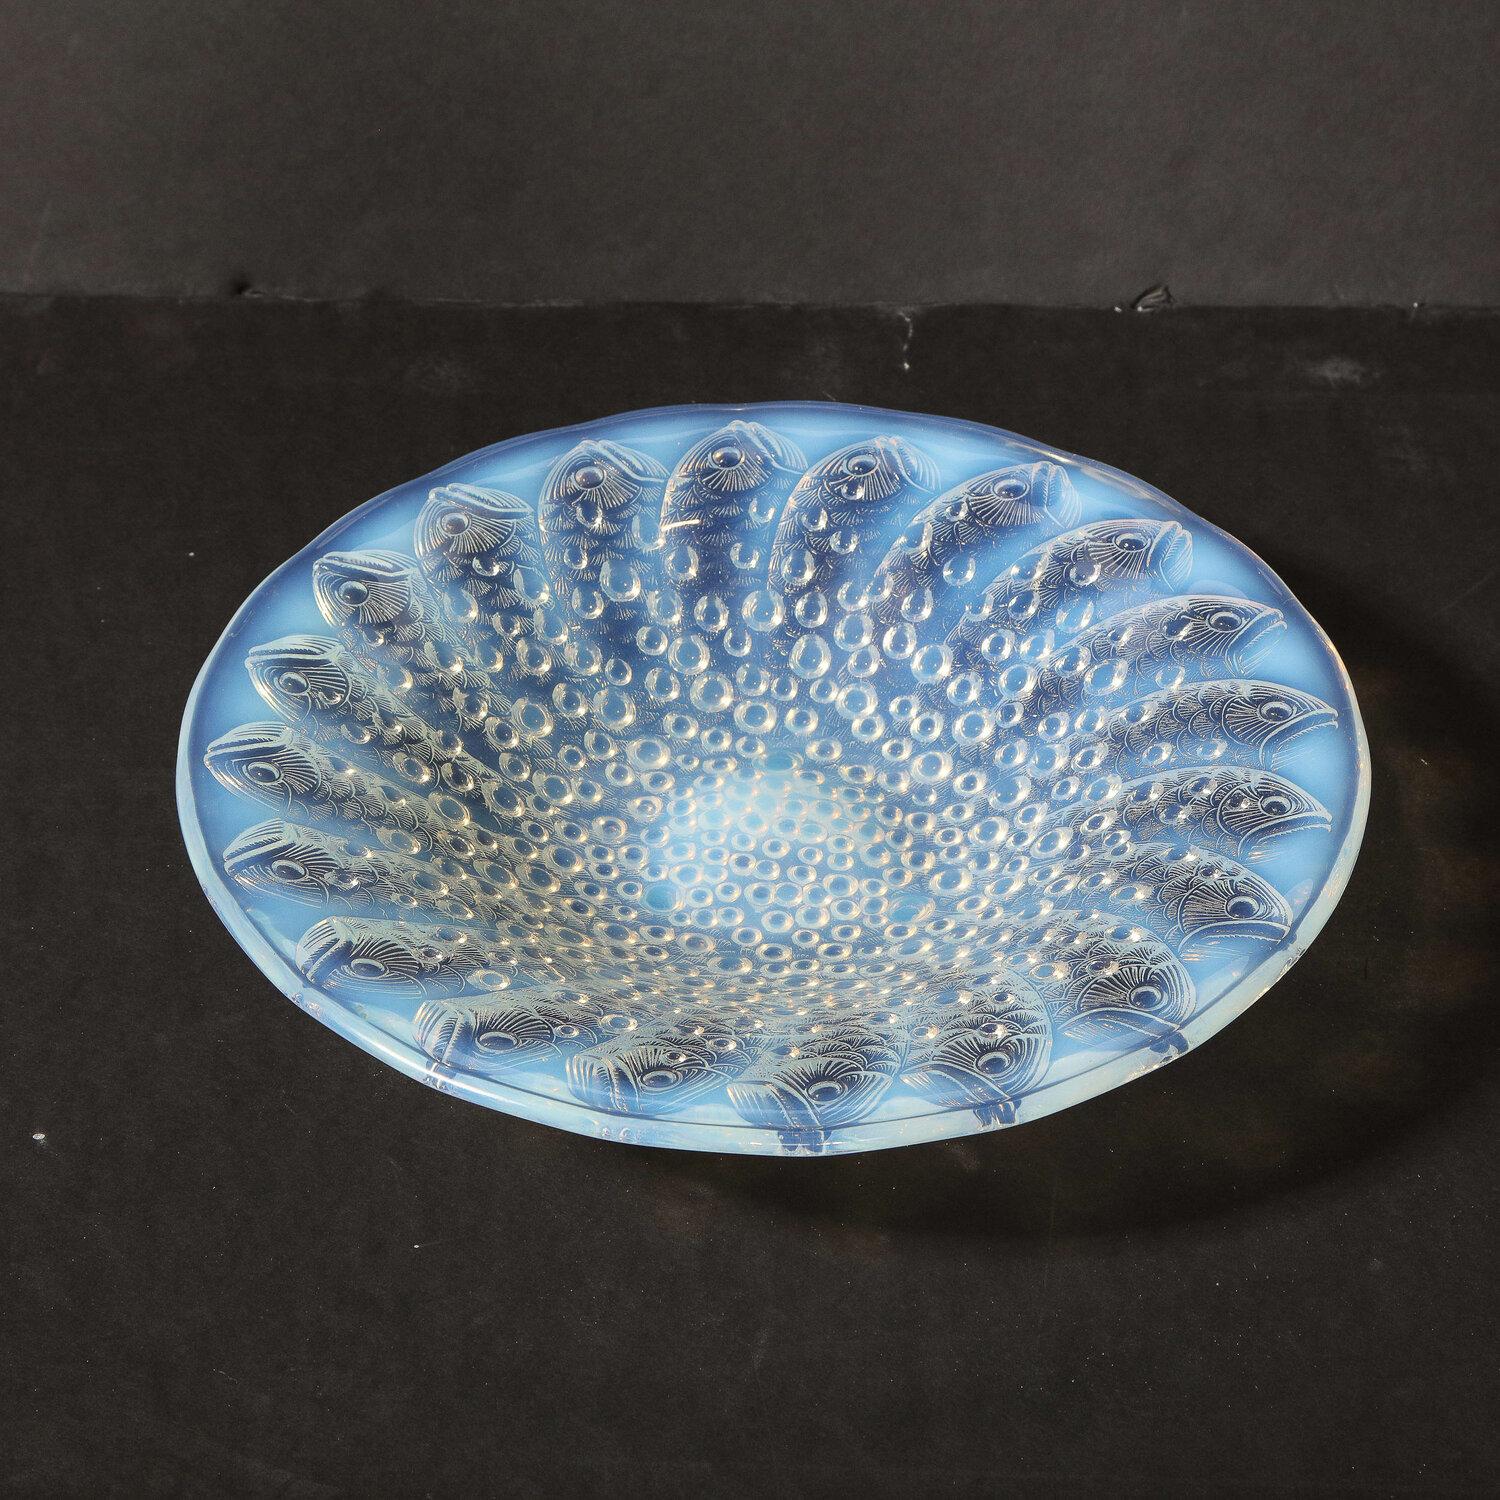 Art Deco Opalescent Glass Center Bowl with Repeating Fish Motif by Lalique For Sale 8